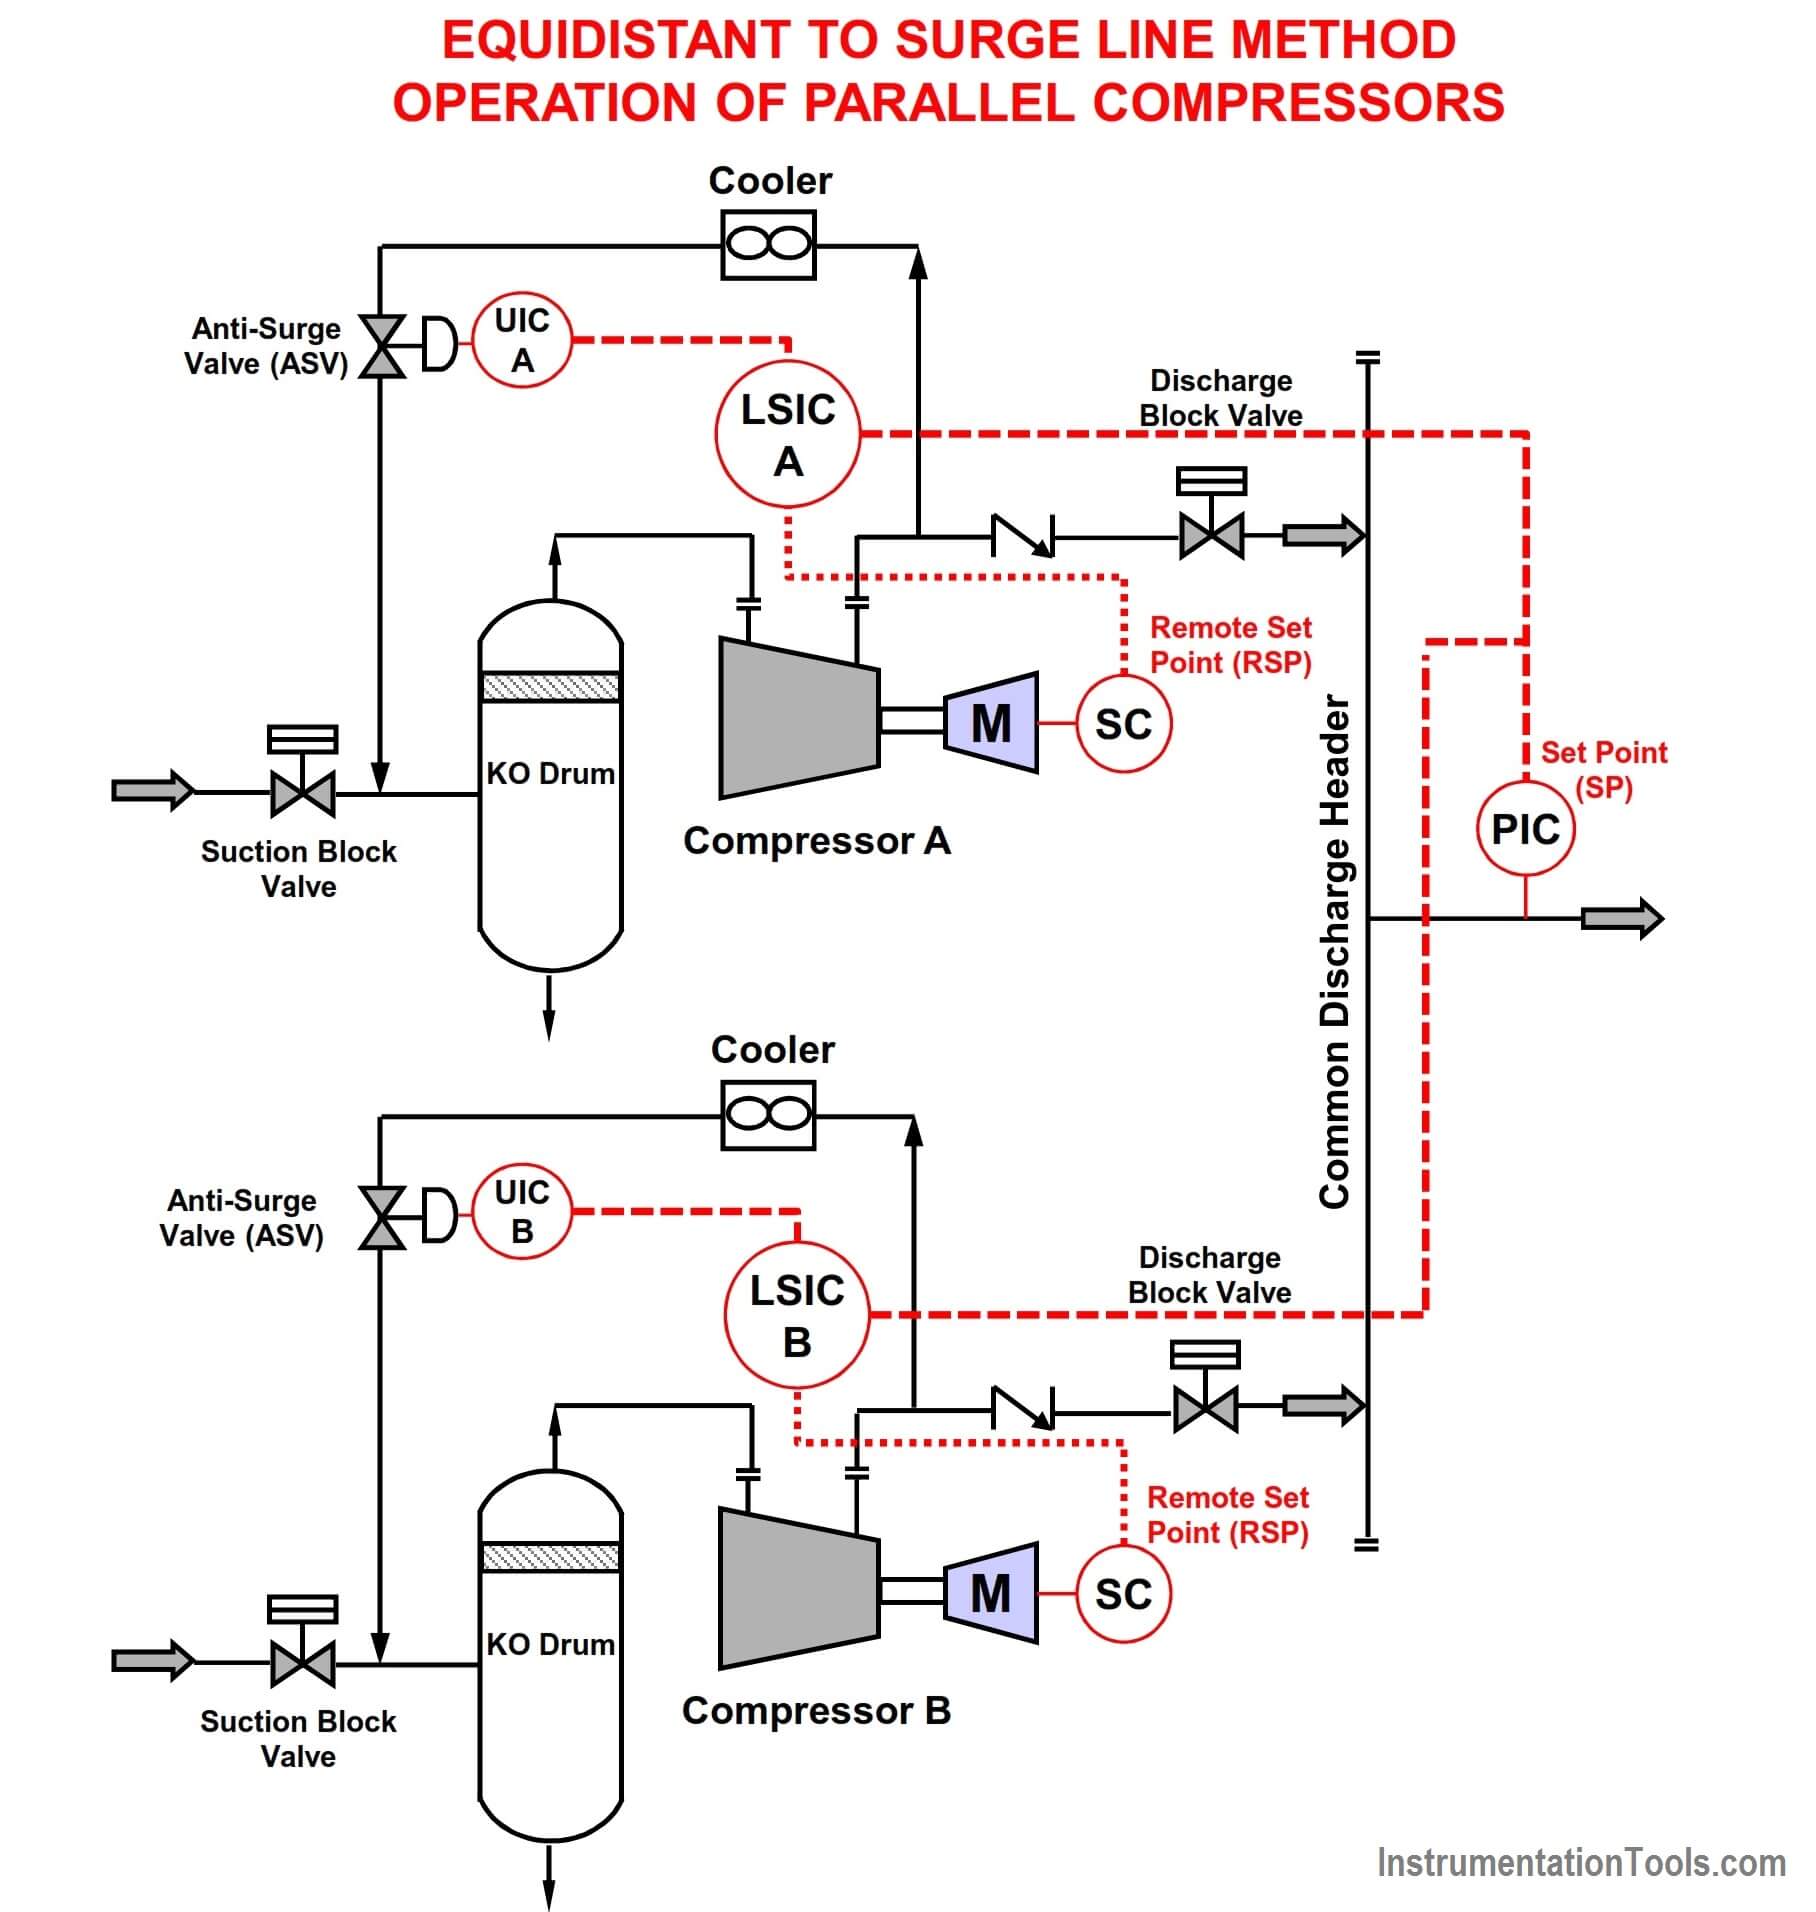 Equidistant to Surge Line Method Operation of Parallel Compressors